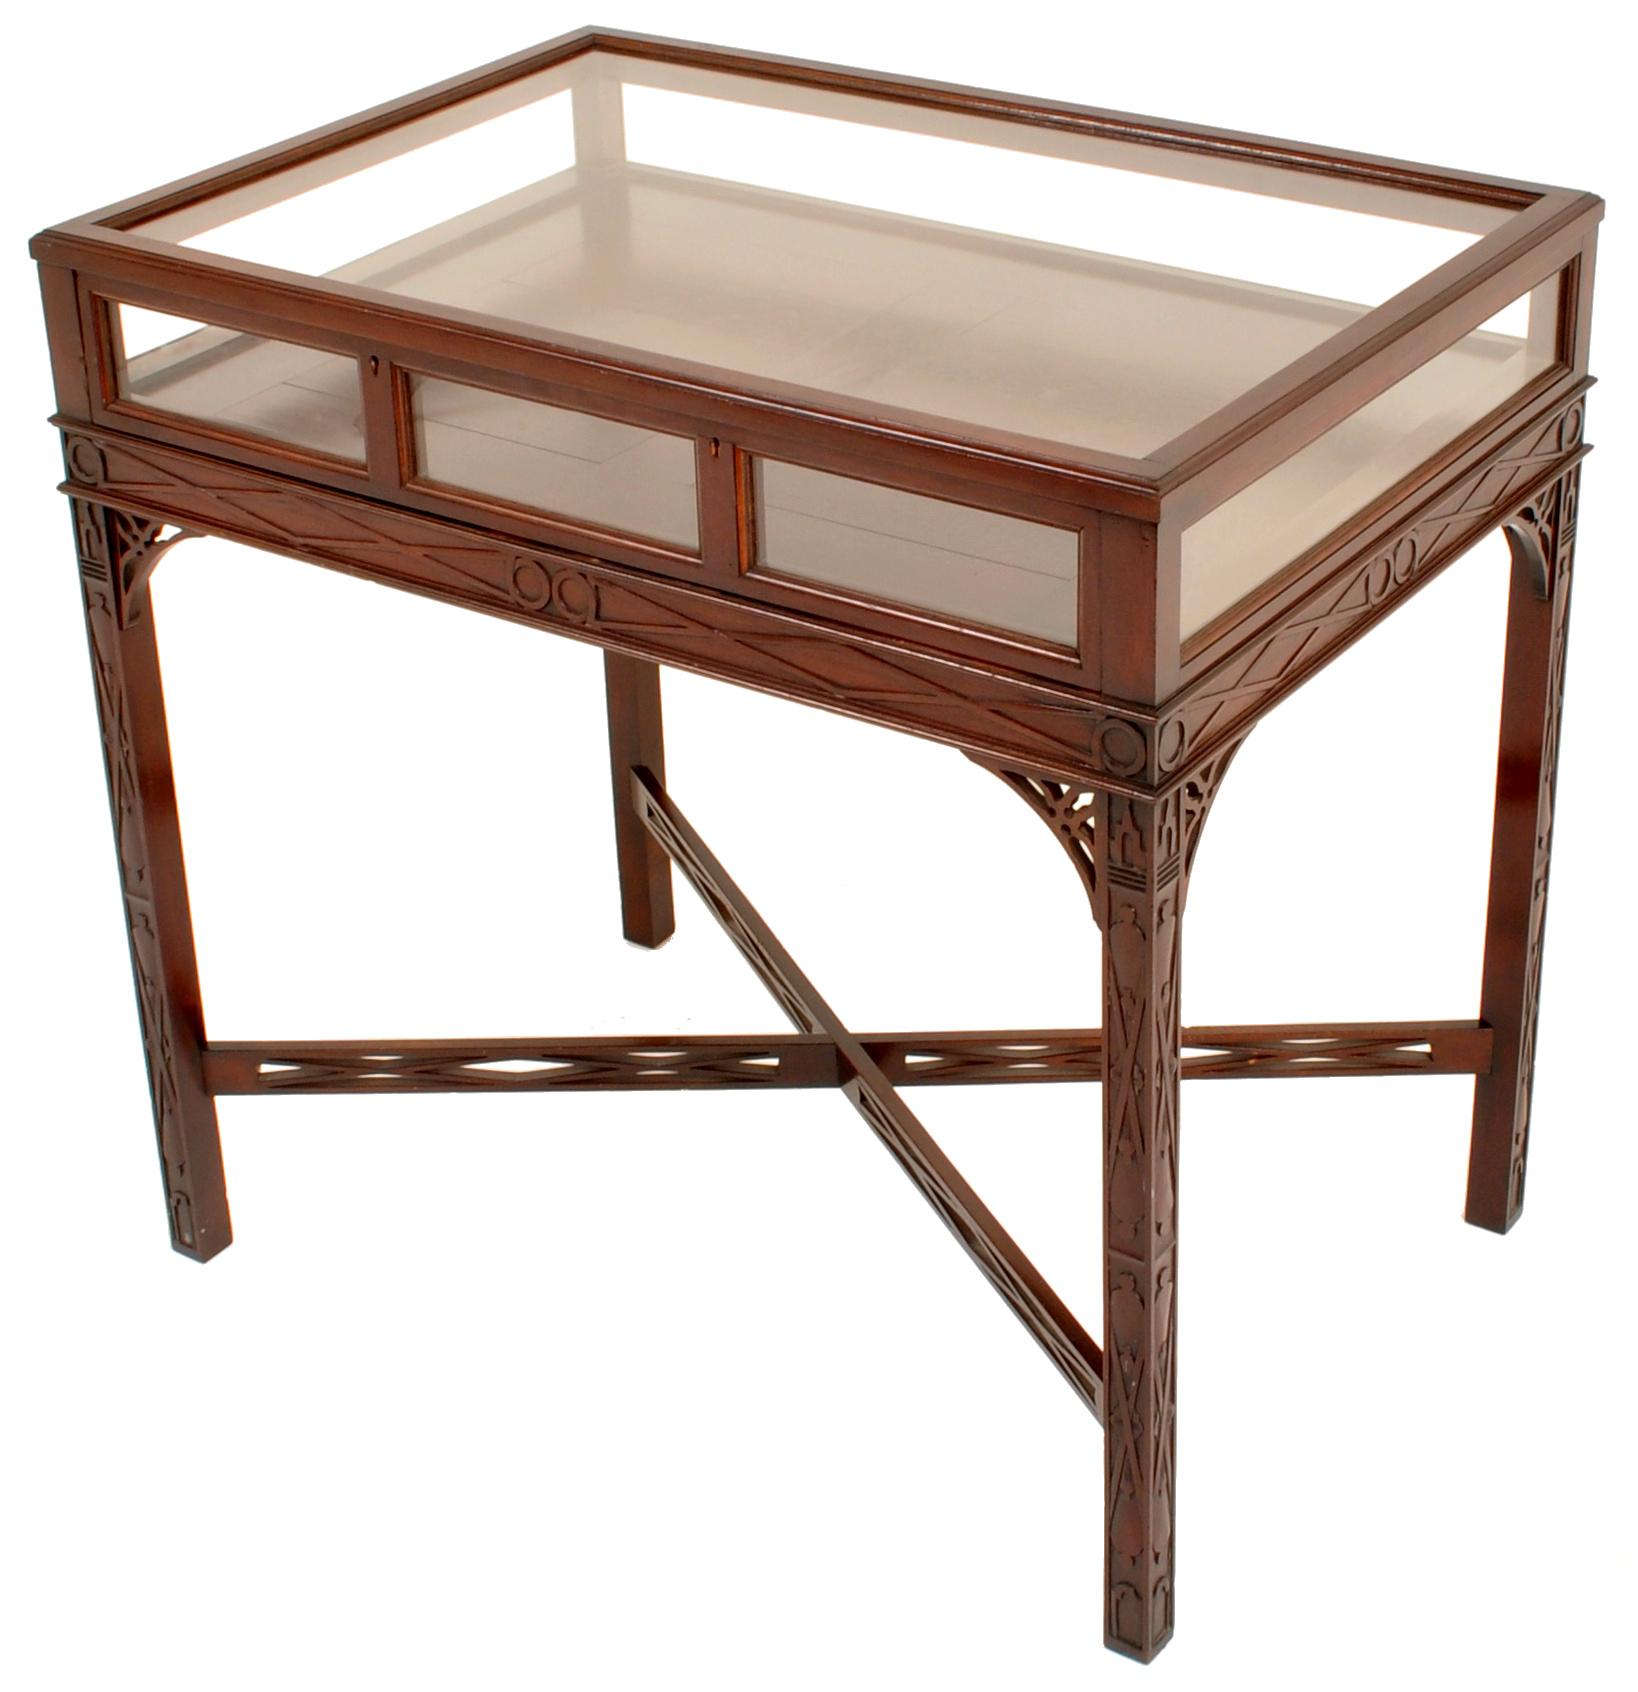 Antique Edwardian George III Chinese Chippendale style Bijouterie table / vitrine/ display case, circa 1900. A rectangular, shallow, display case table on four square legs with crossed stretchers, having 'blind fretwork' to the skirt and the legs